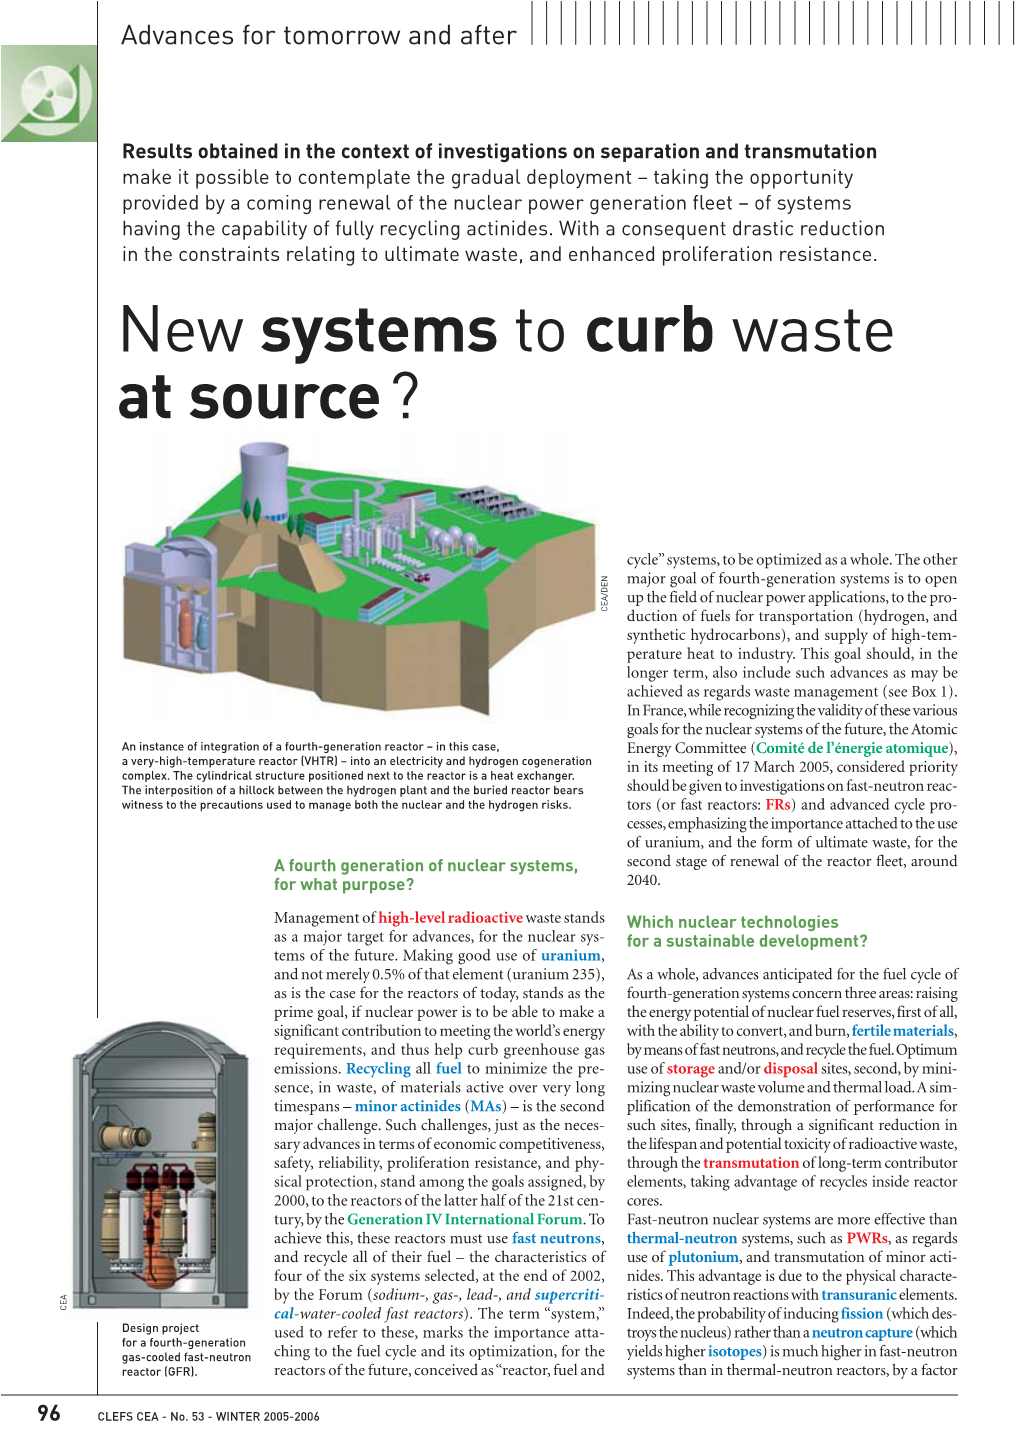 New Systems to Curbwaste at Source?